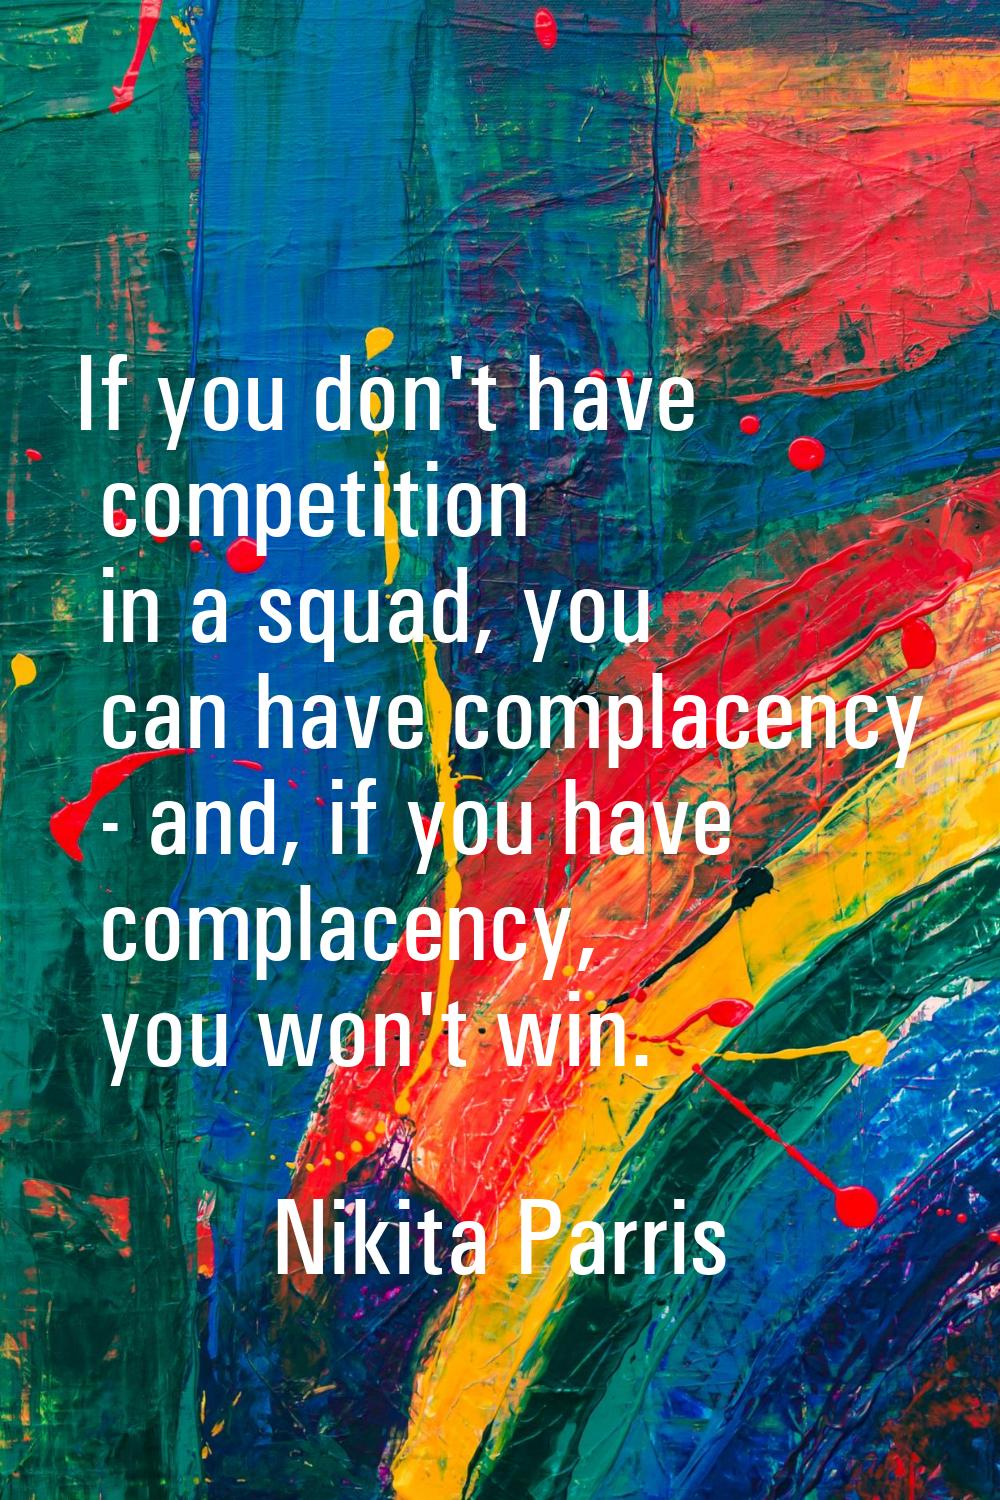 If you don't have competition in a squad, you can have complacency - and, if you have complacency, 